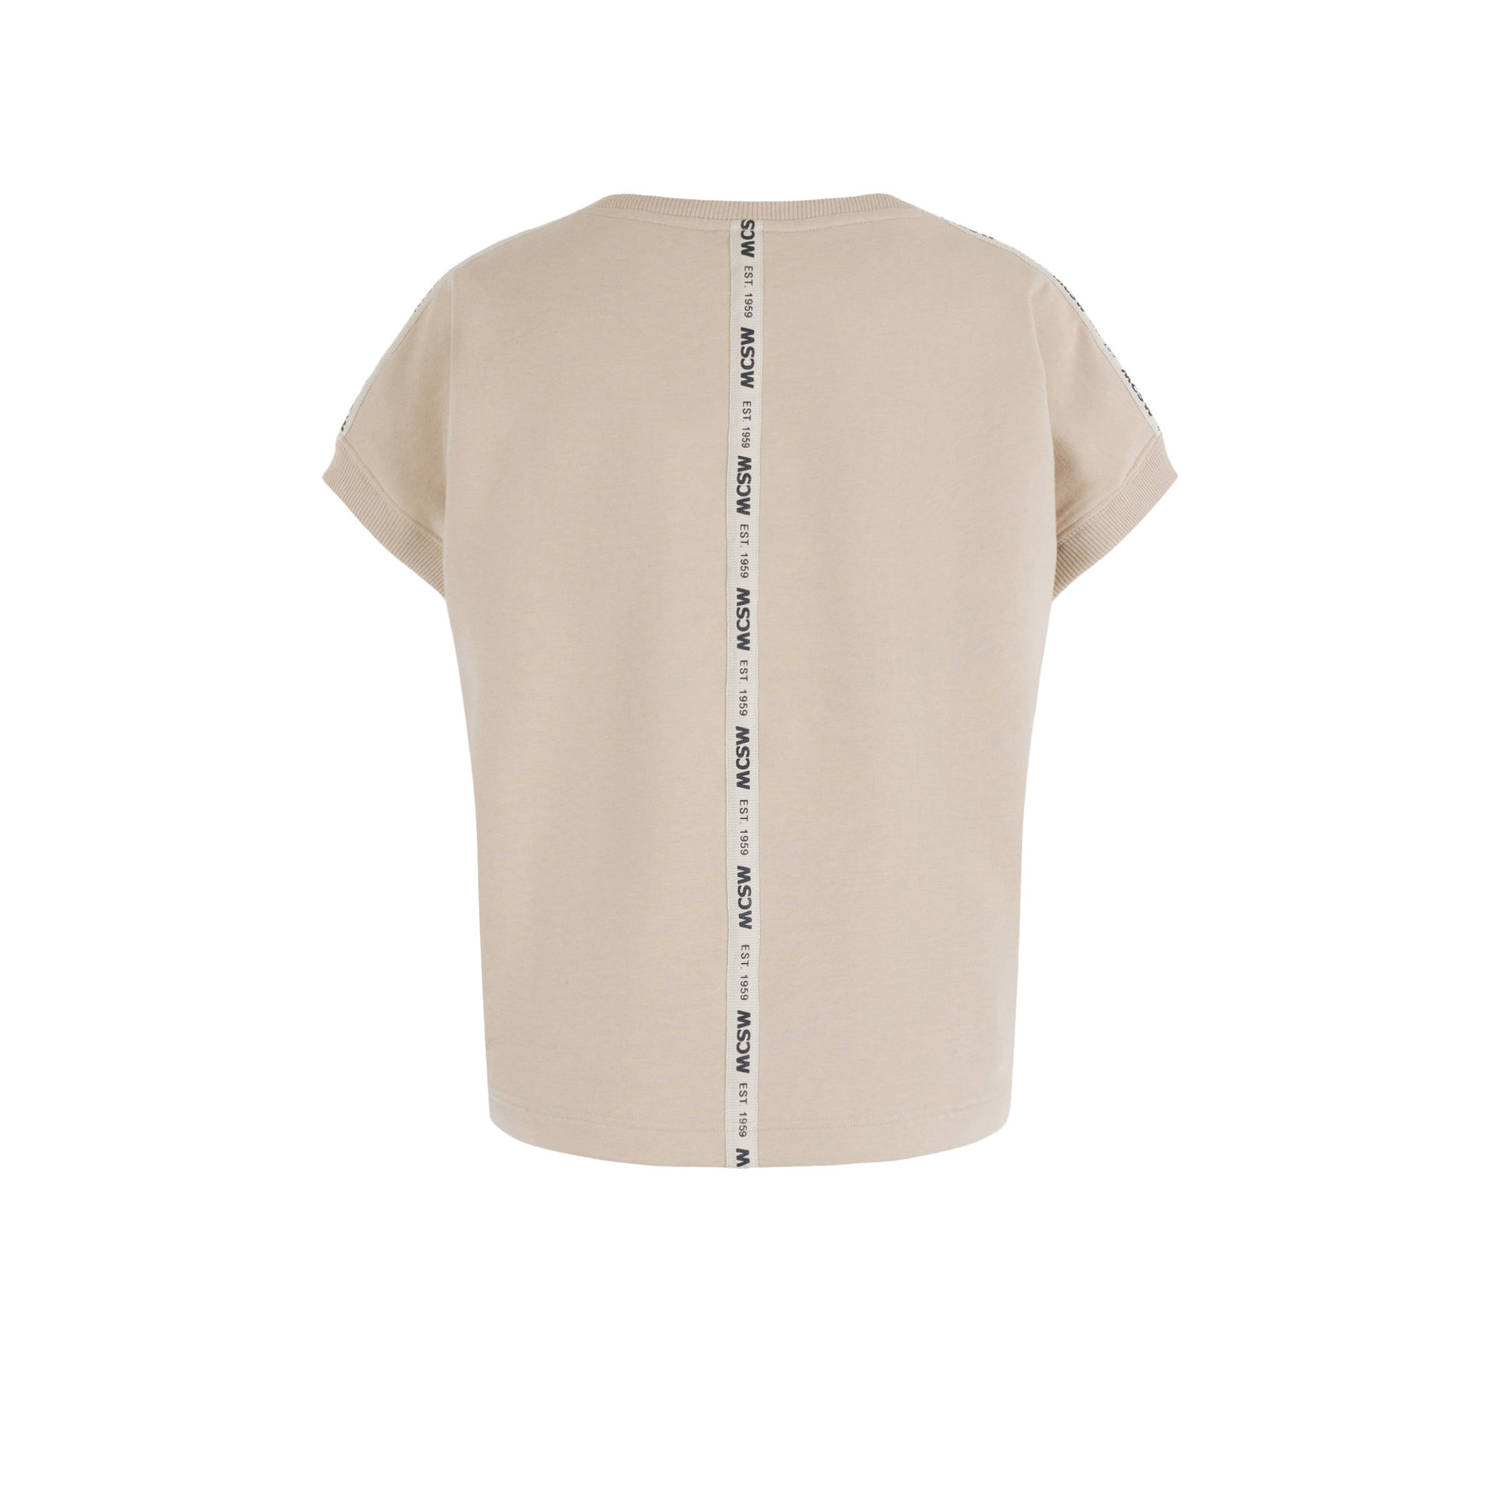 Moscow T-shirt beige